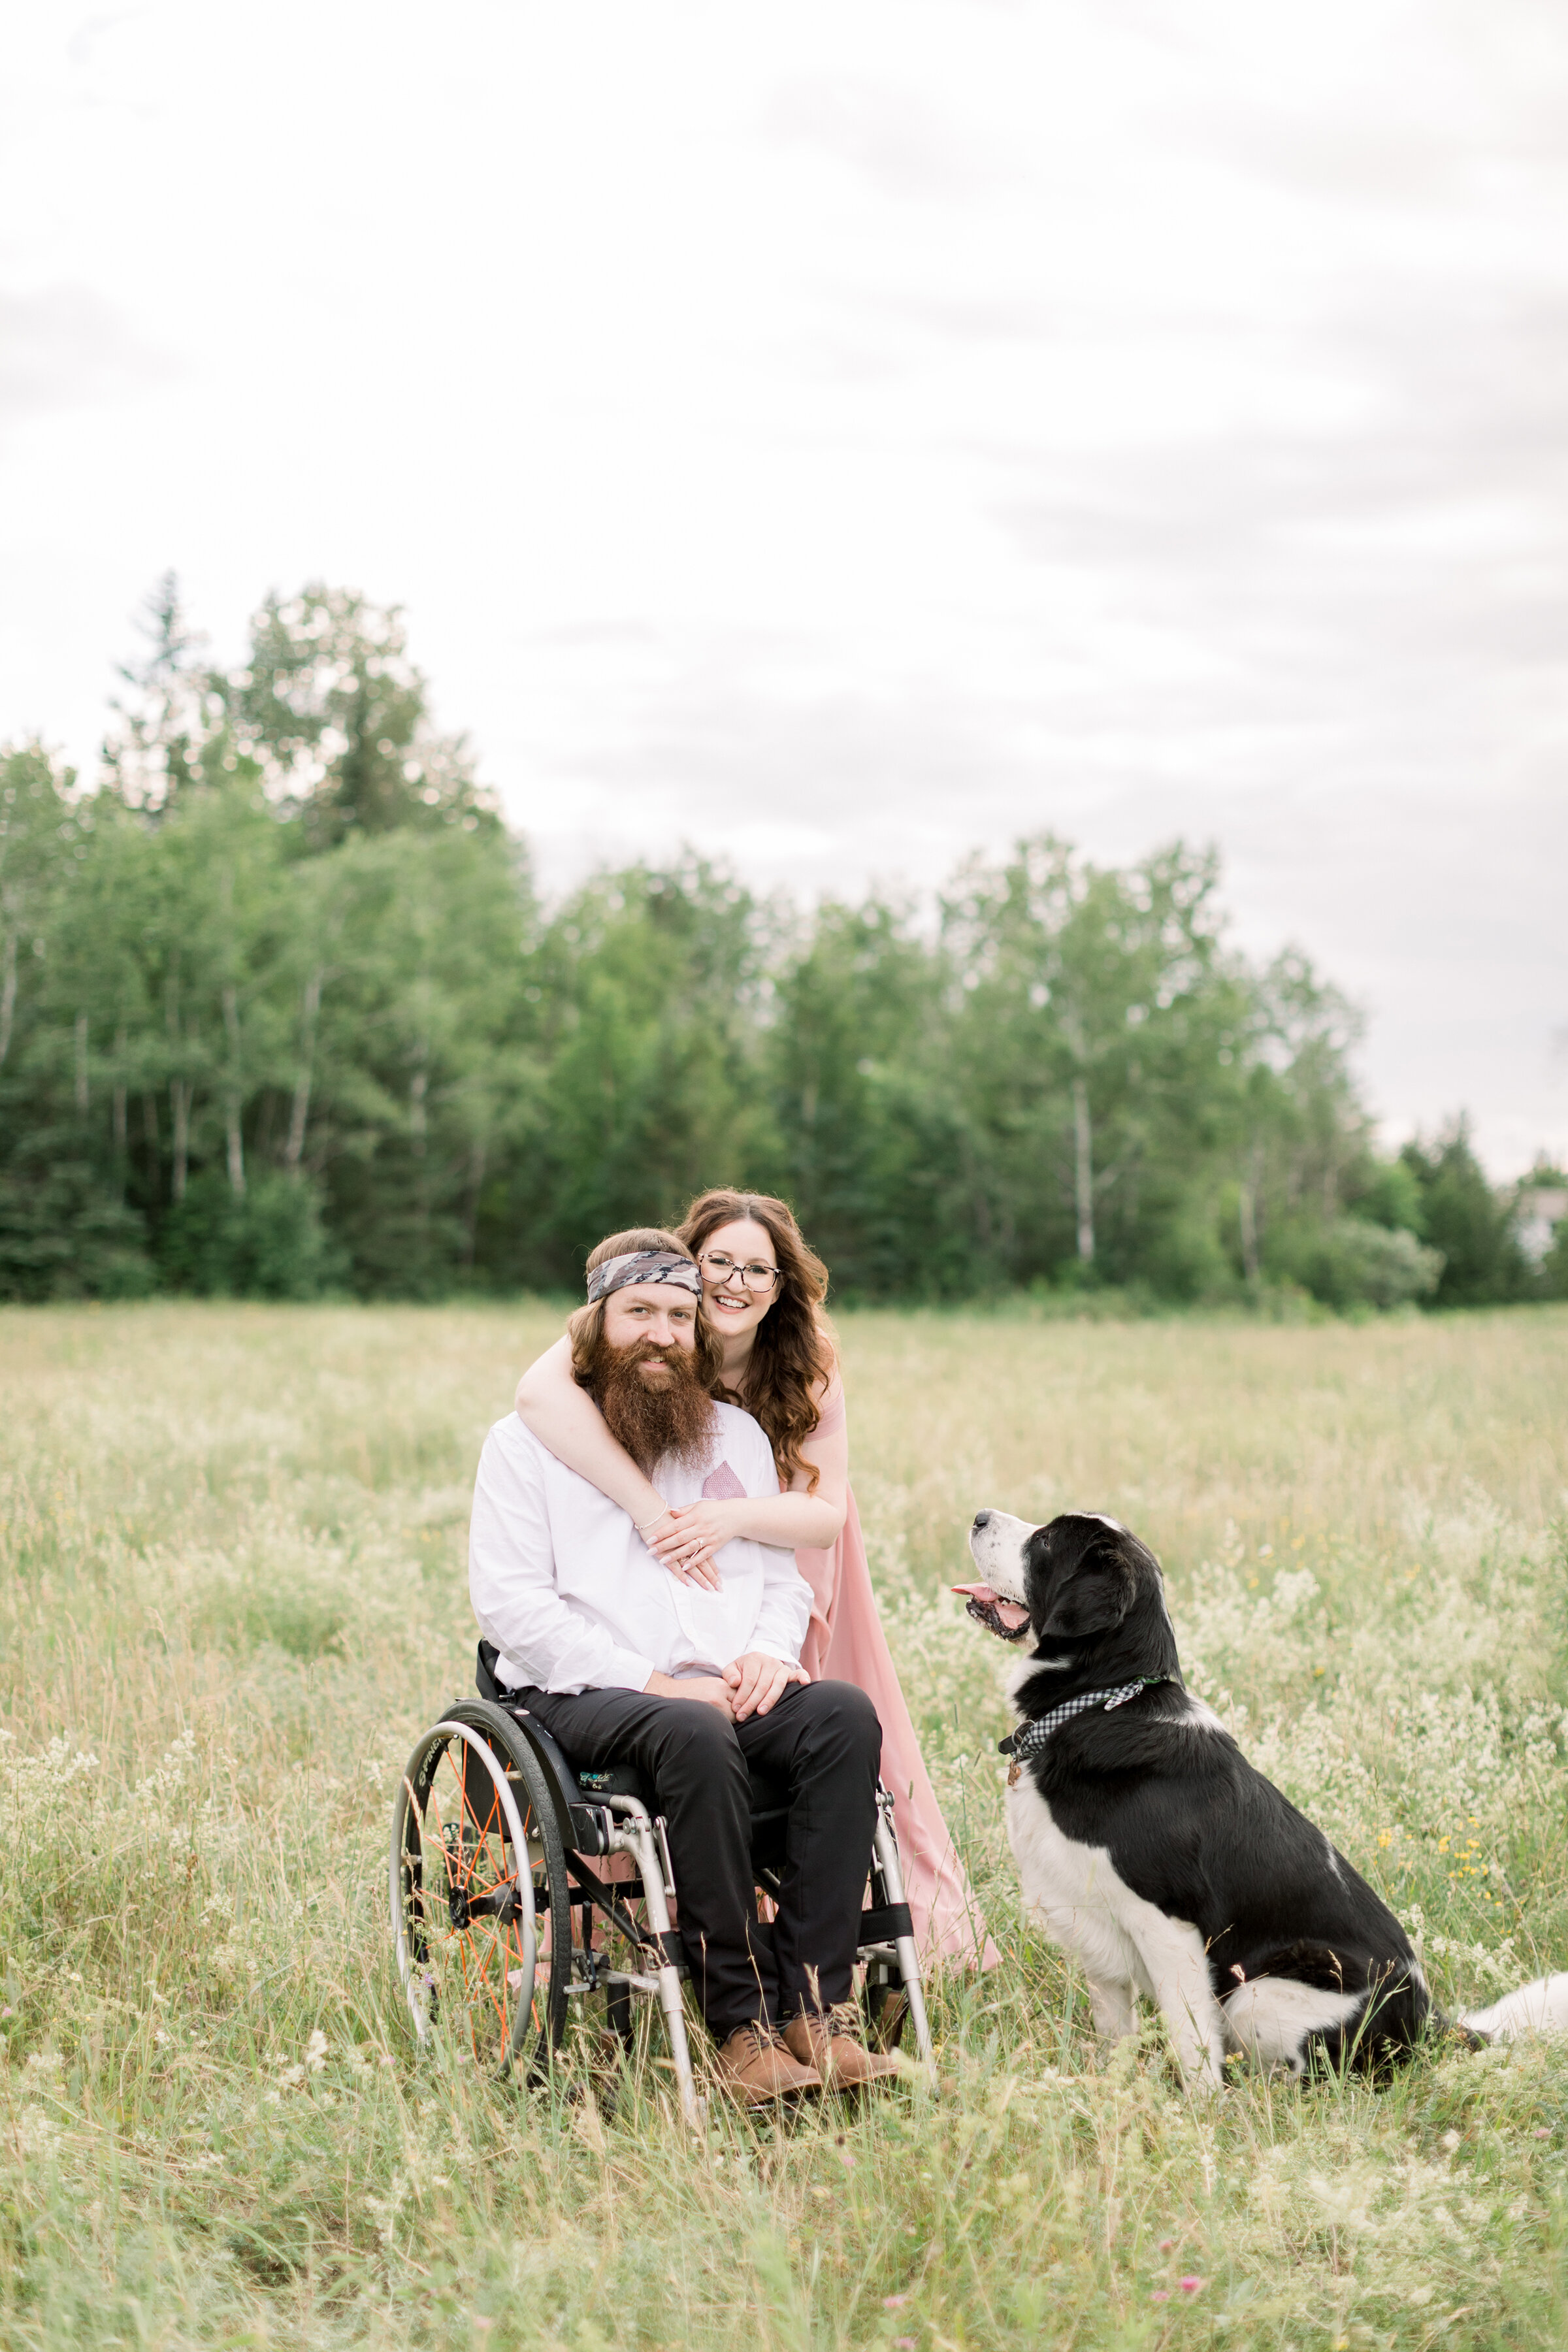  A beautiful couple pose together with their dog in a rustic outdoor engagement session in Ontario, Canada by Chelsea Mason Photography. Client pose inspiration pose with dog inspiration ideas and goals engagement session inspiration outdoor session 